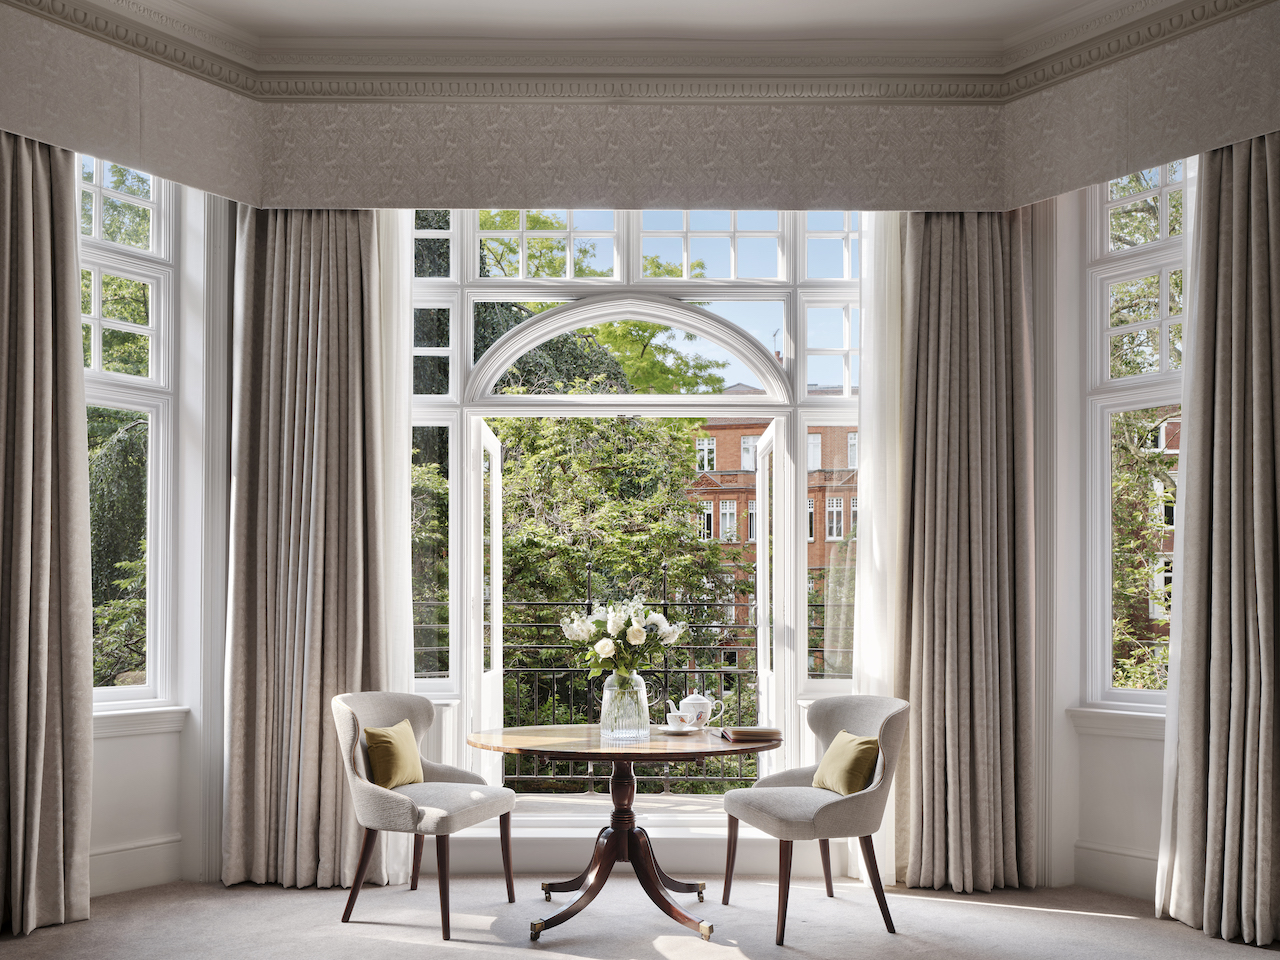 The Chelsea Townhouse has opened as an elegant retreat steeped in history and charm.